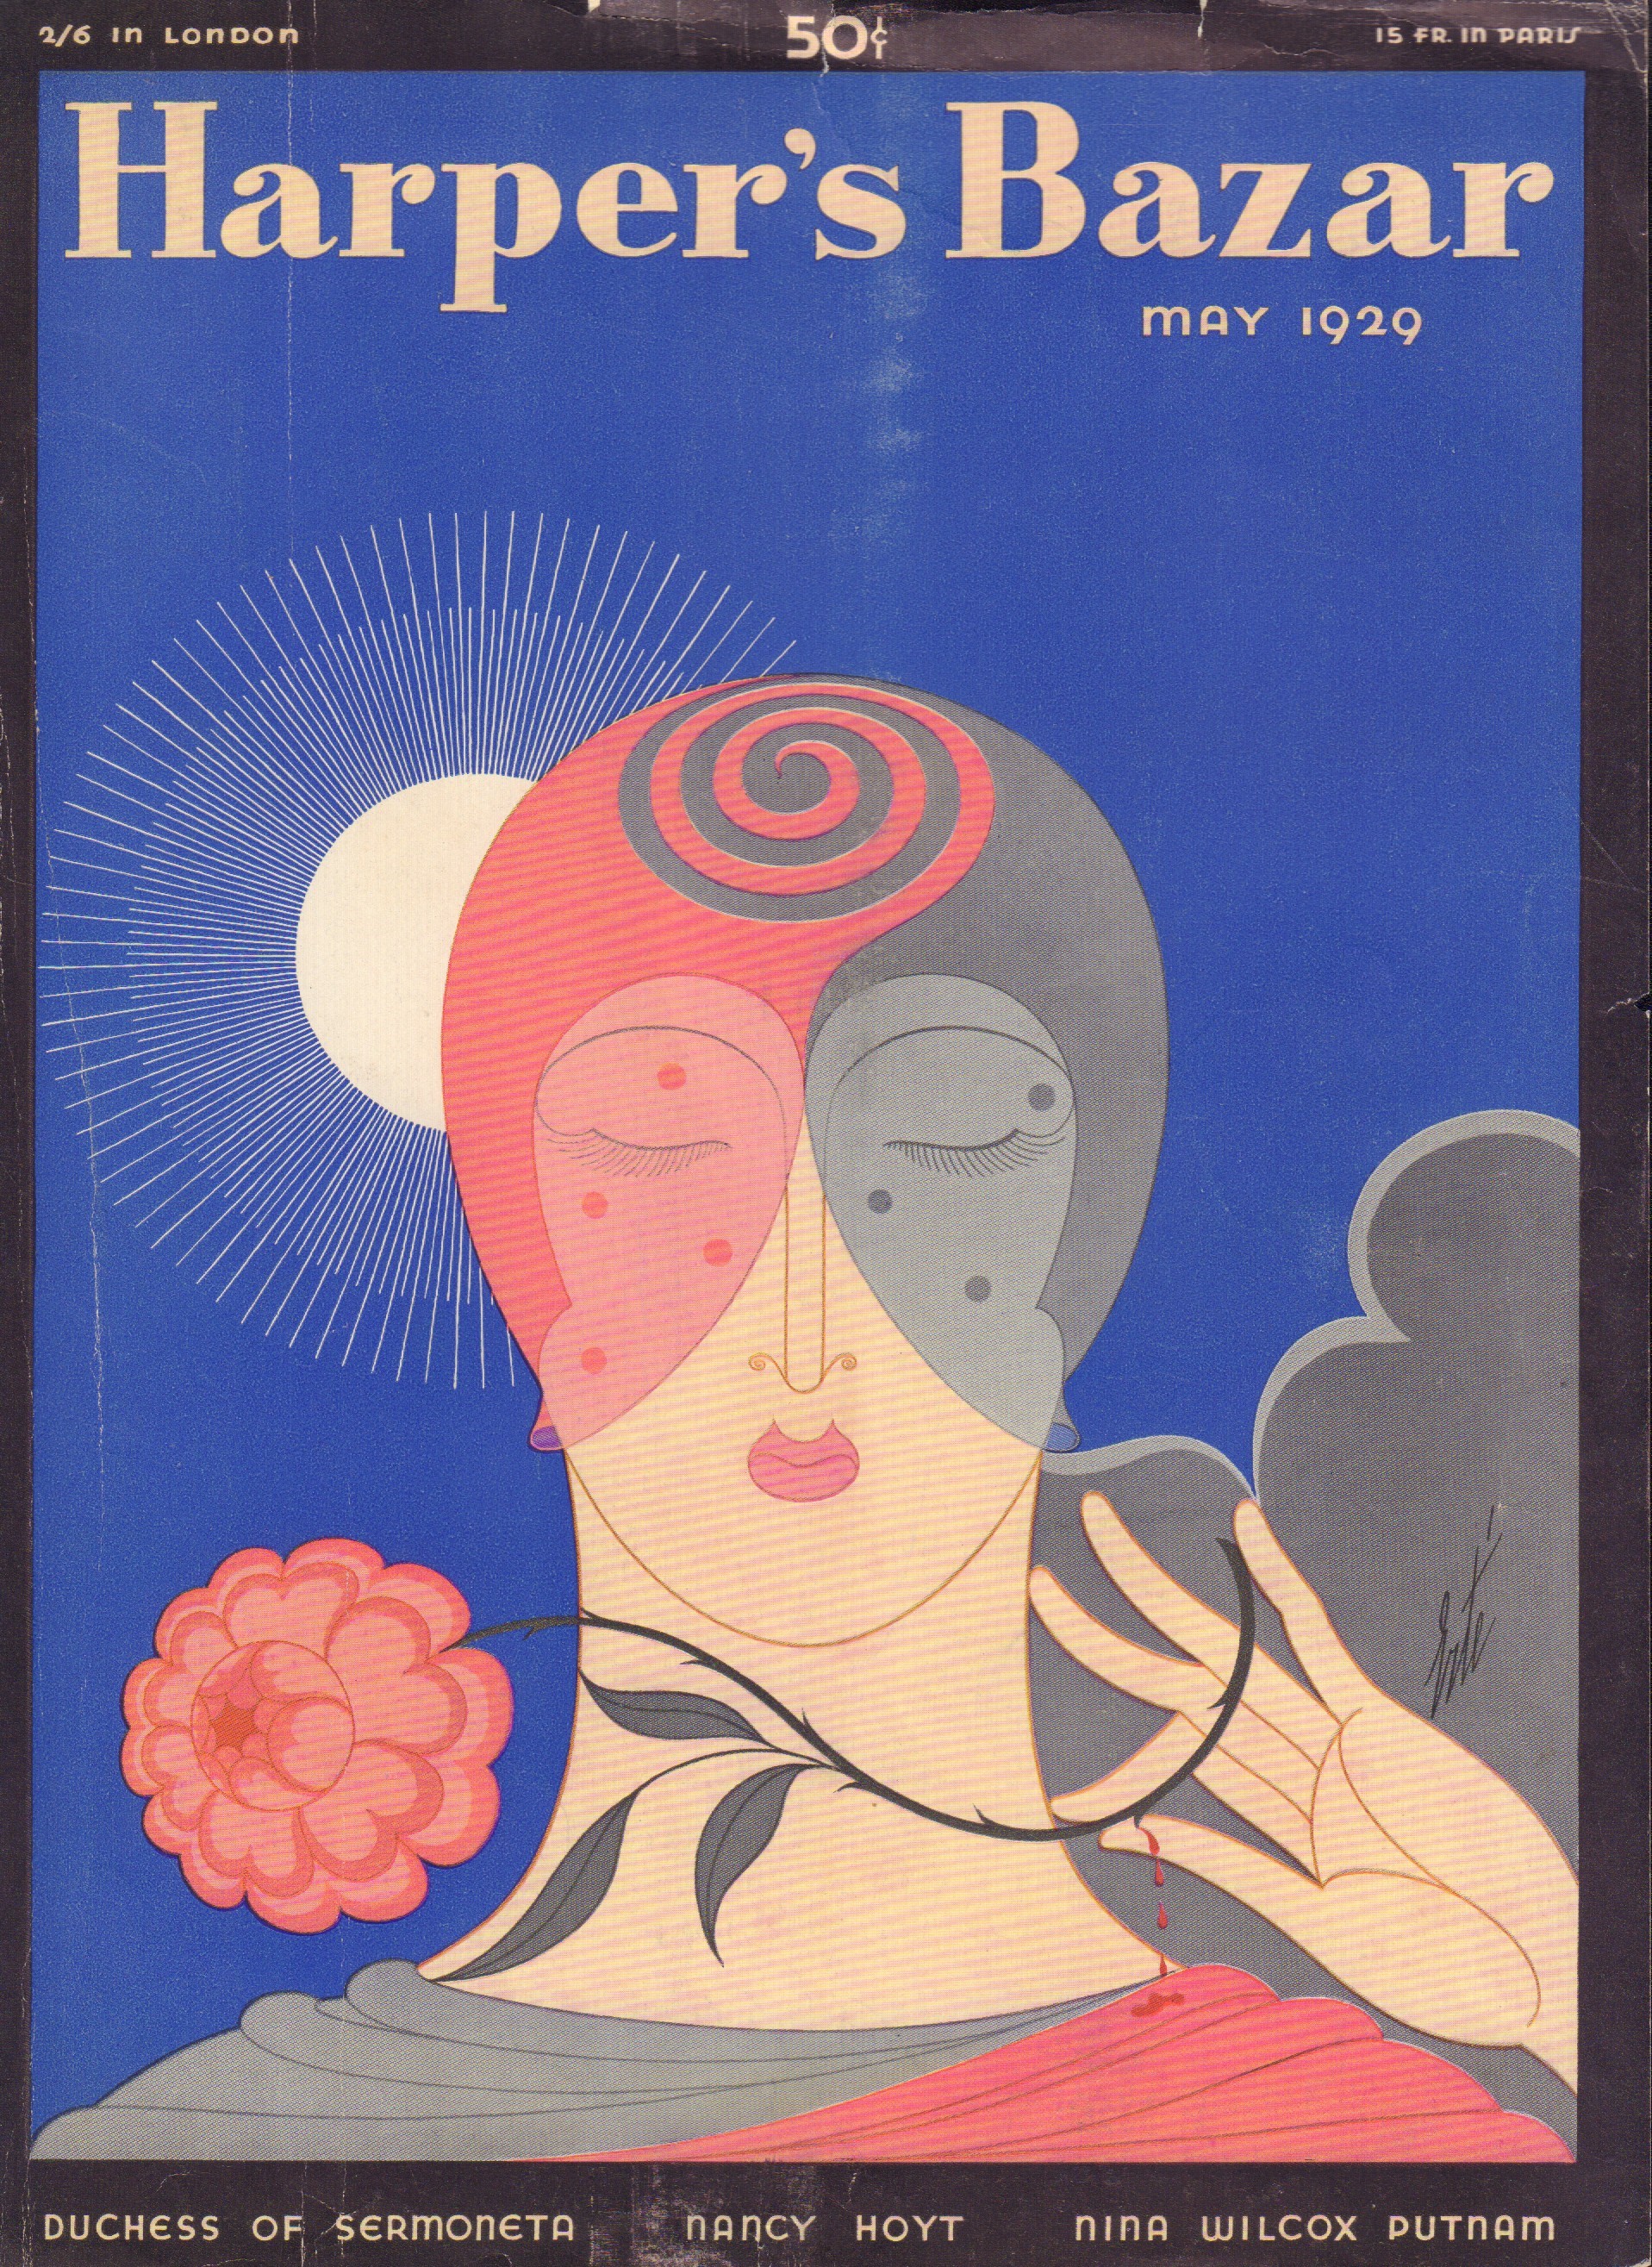 Image for Harper's Bazar (Bazaar) May 1929 - Cover Only 